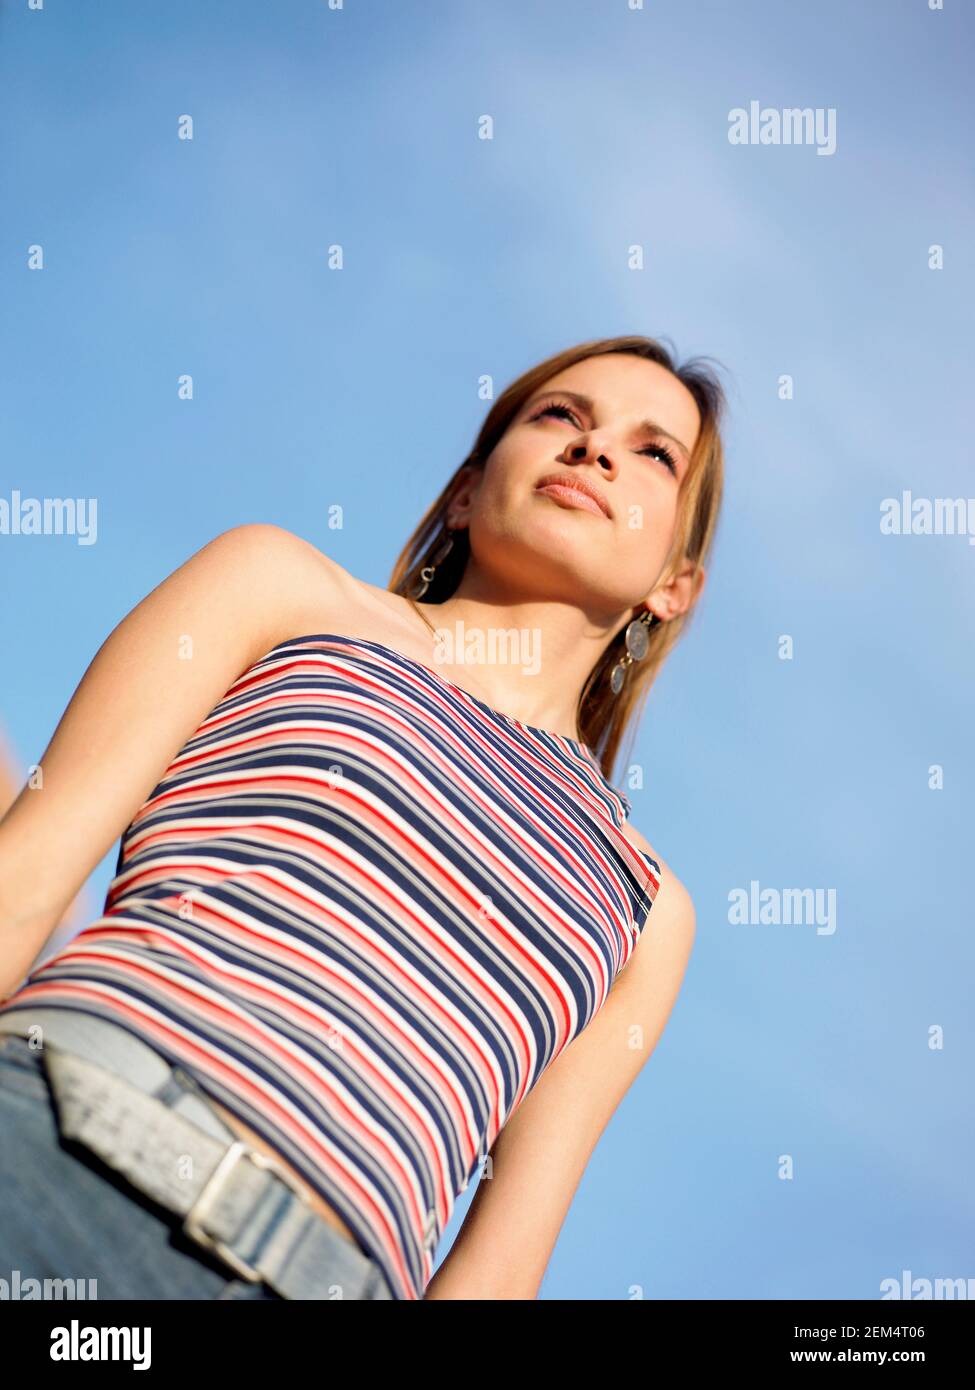 Low angle view of a young woman standing and looking away Stock Photo